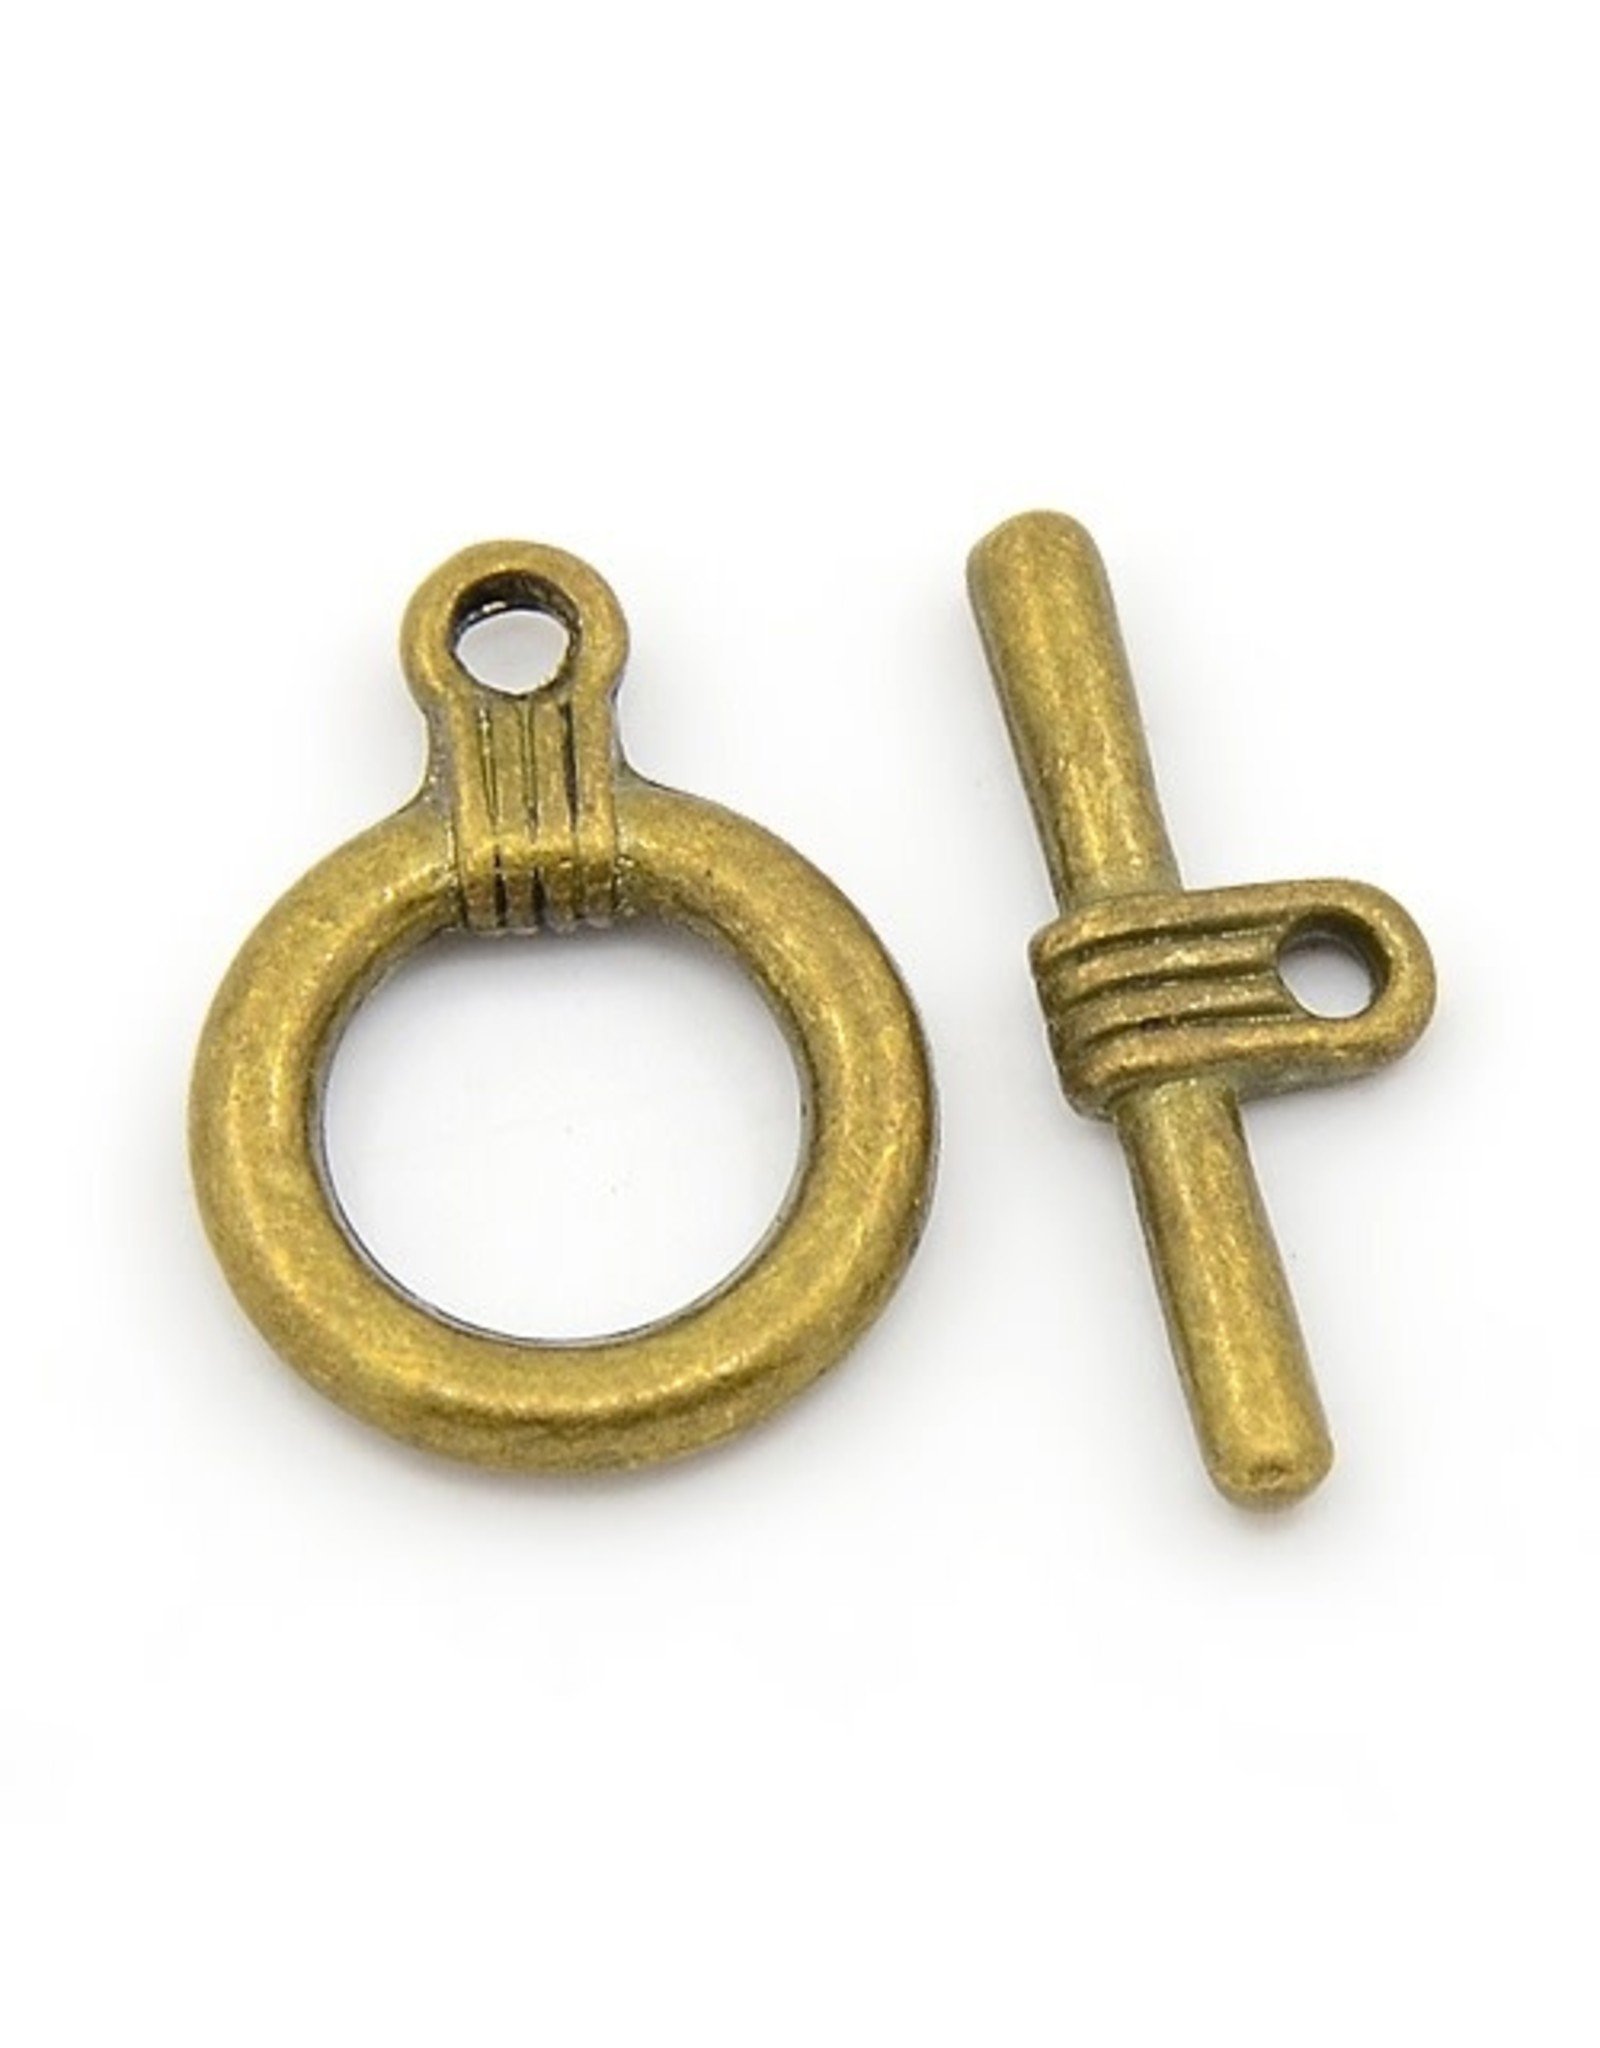 Toggle Clasp Round 16mm Antique Brass  NF  x10